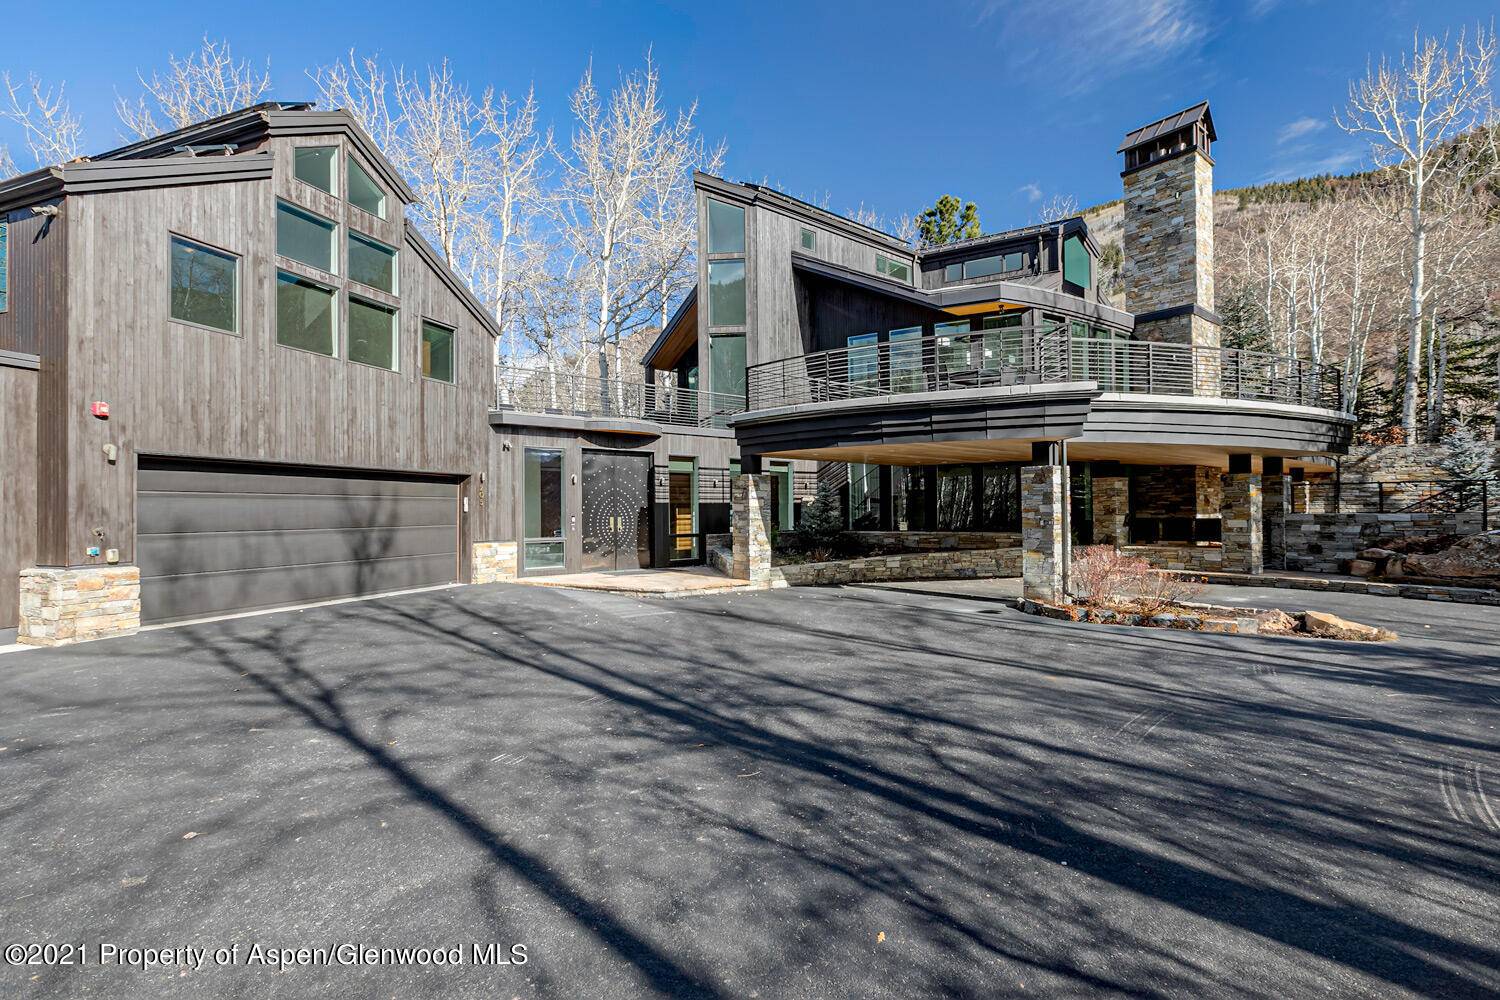 Located in East Aspen is a private enclave on Roaring Fork Drive is an exquisite, thoughtfully designed home located on a large lot with beautiful, manicured lawns and gardens and ...